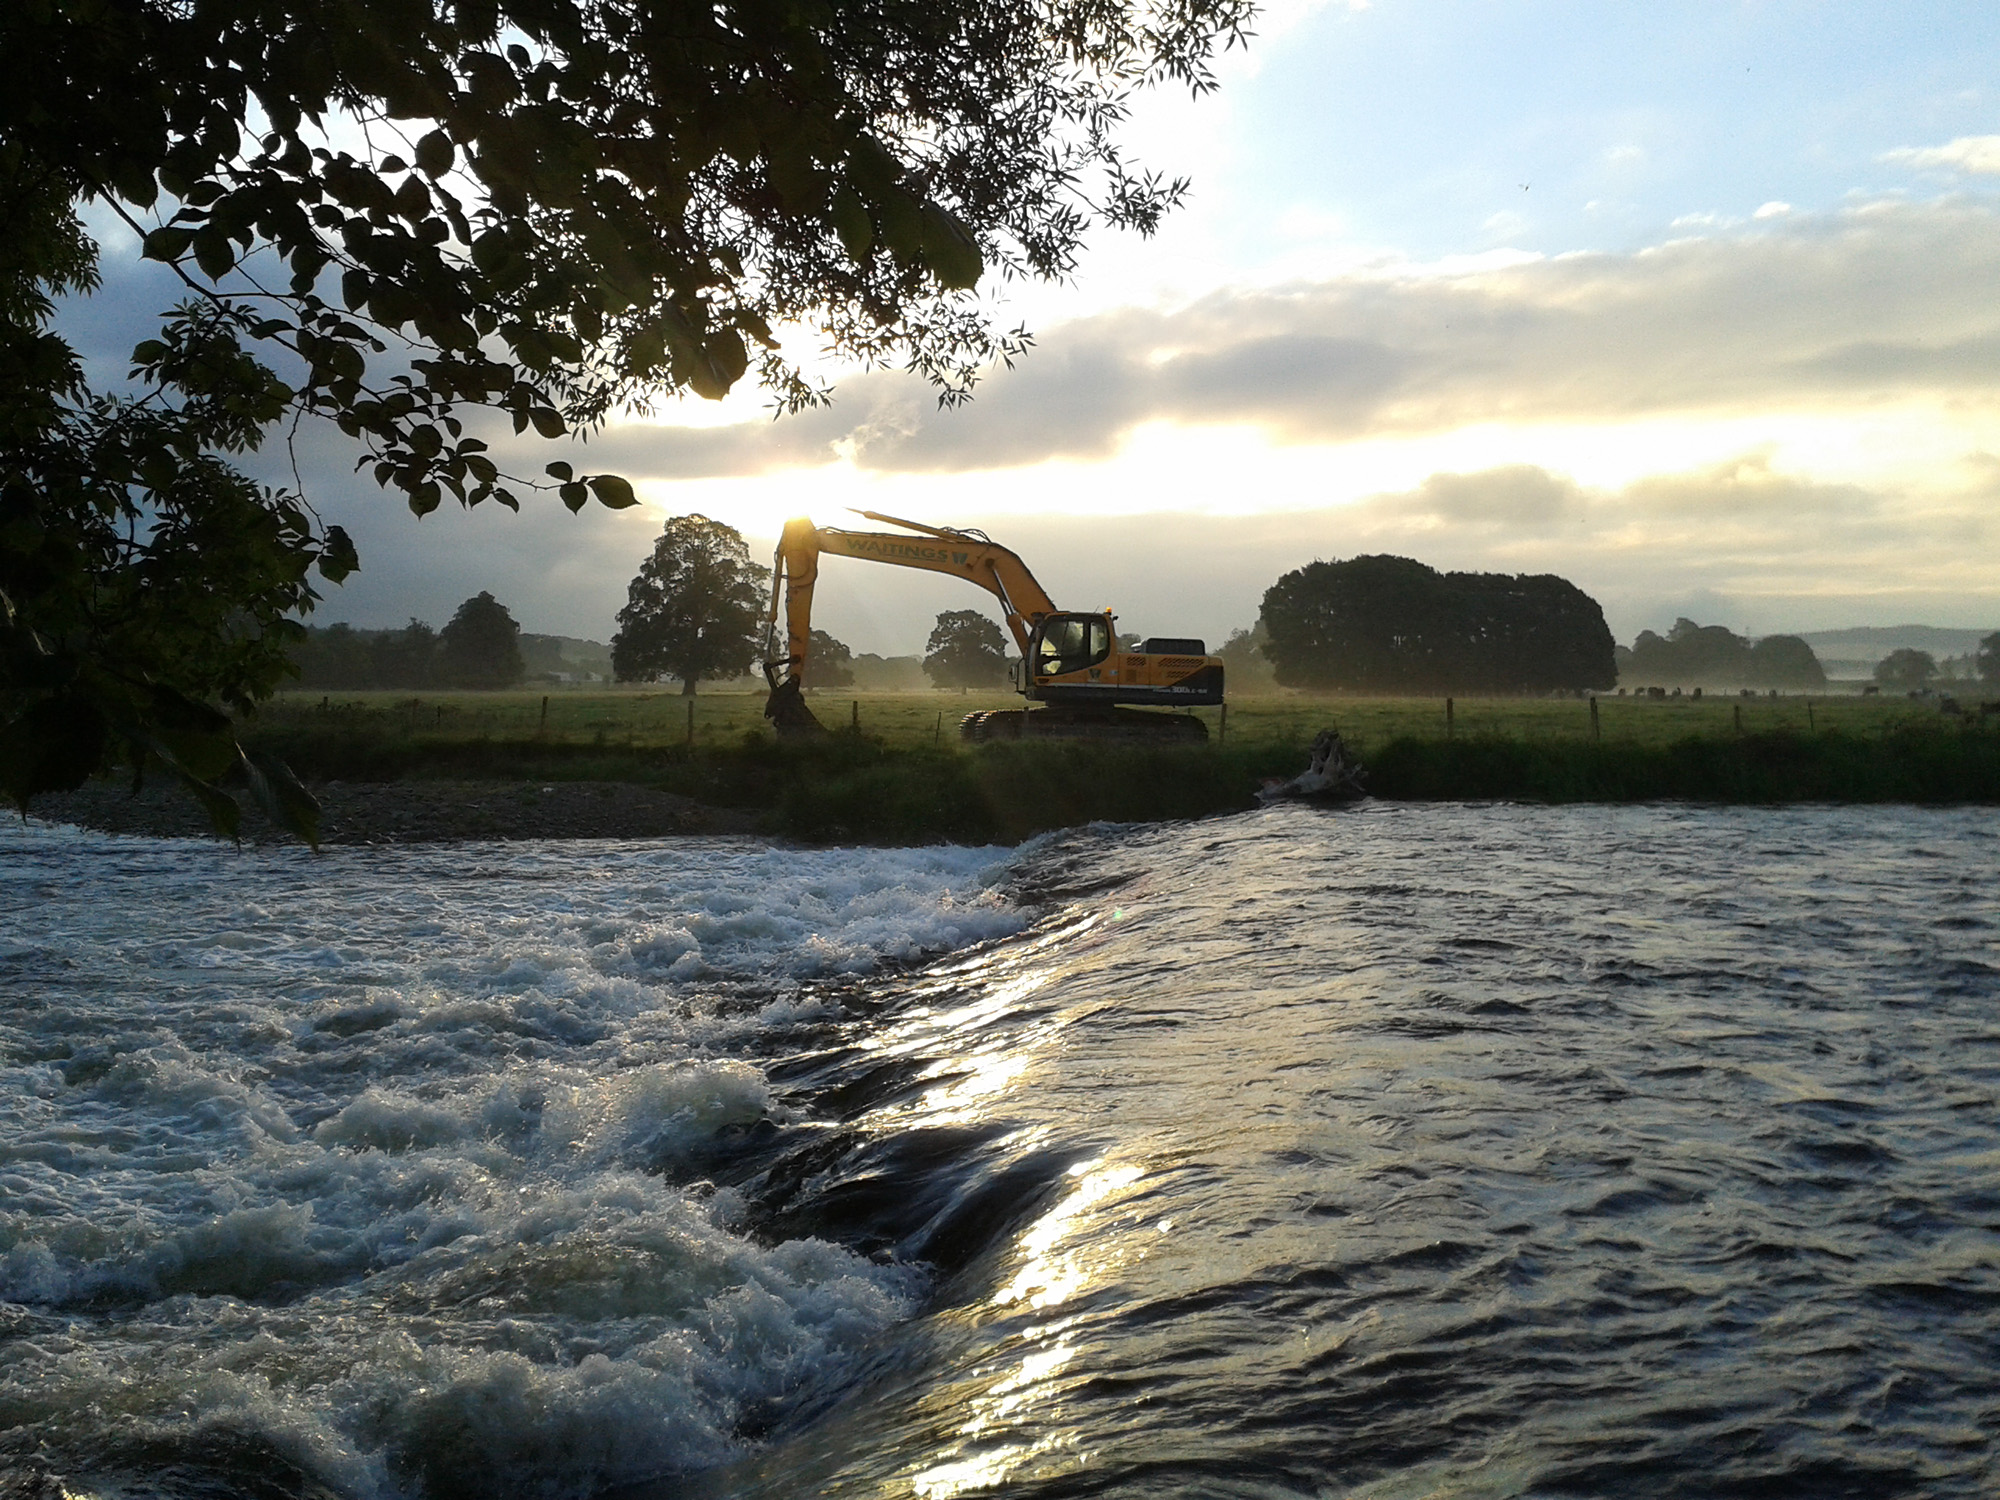 Digger on the riverbank in the sunshine